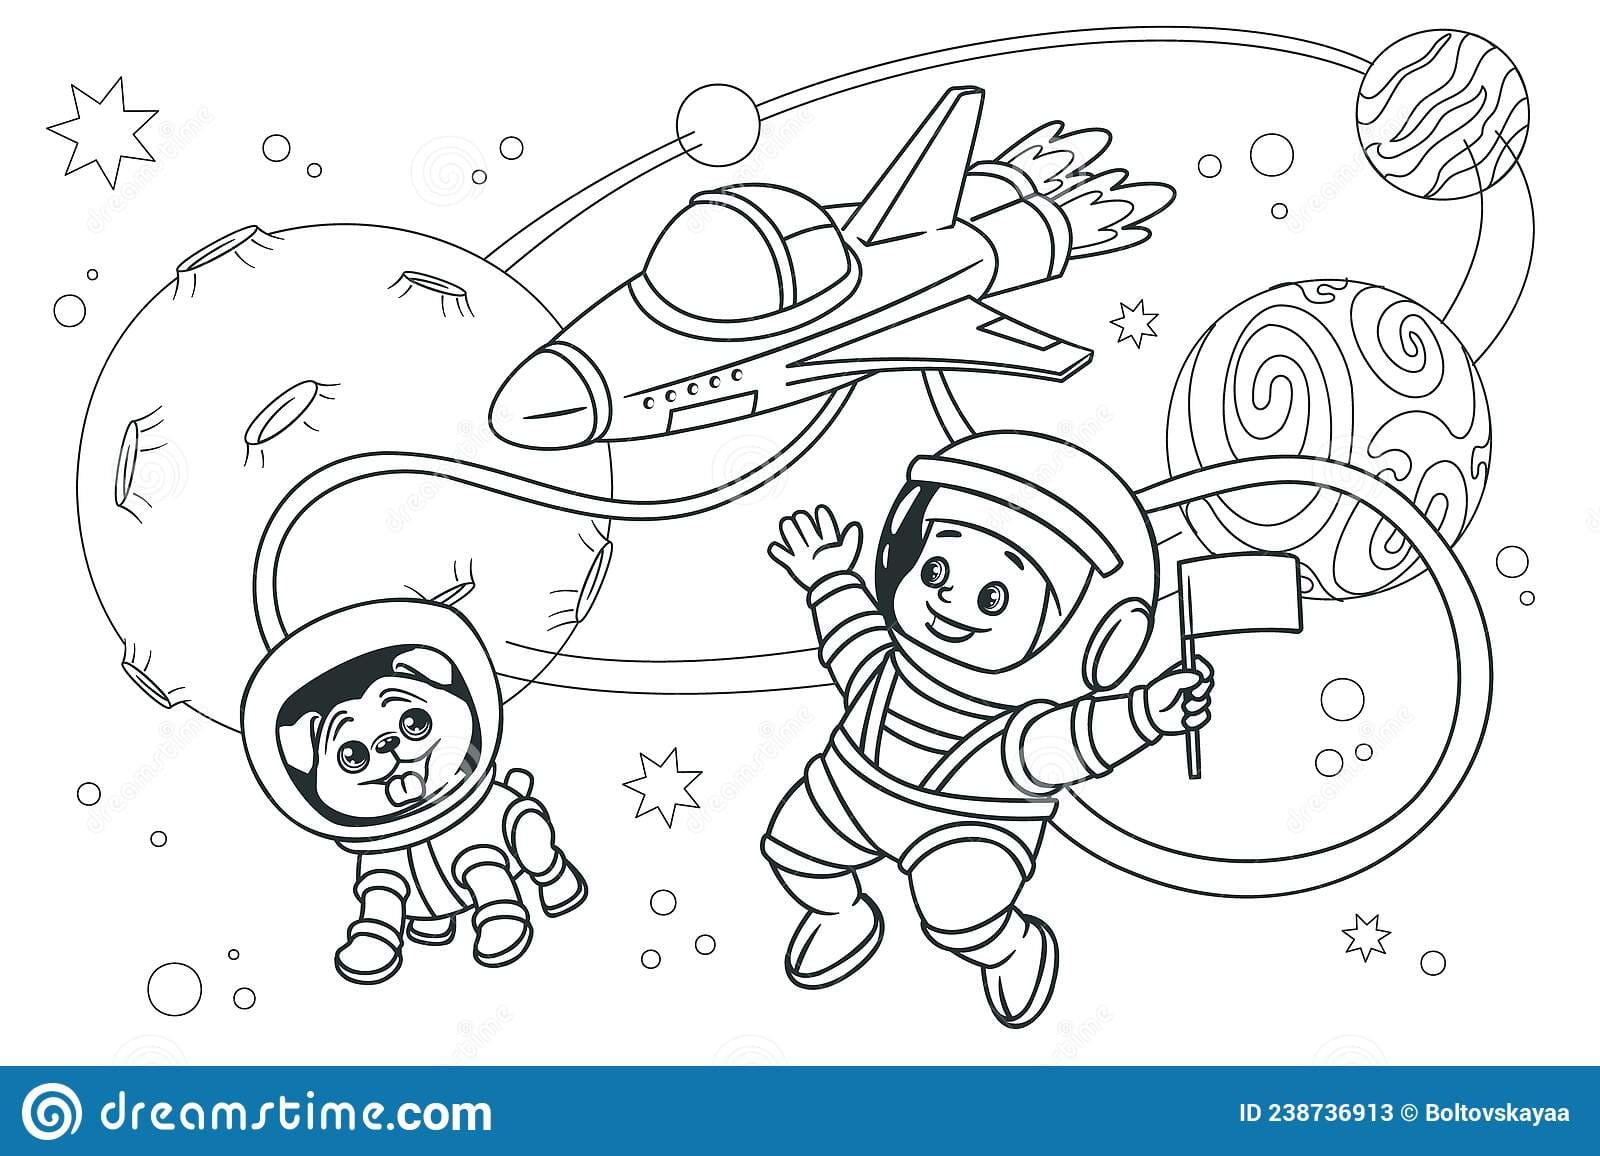 Kid astronaut with a dog astronaut soar in space against the background of stars and planets